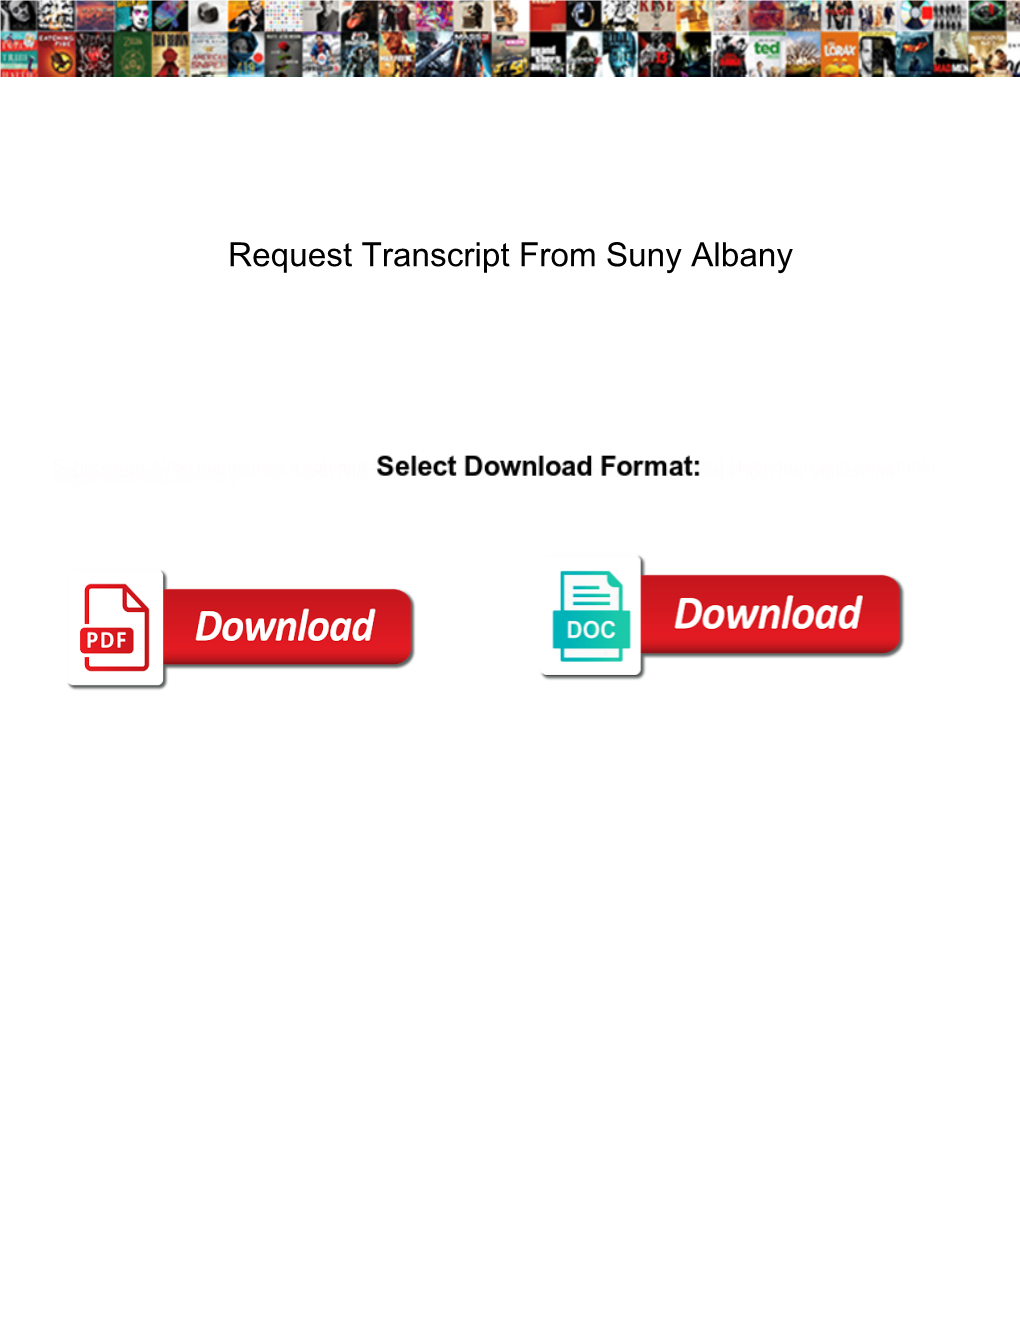 Request Transcript from Suny Albany